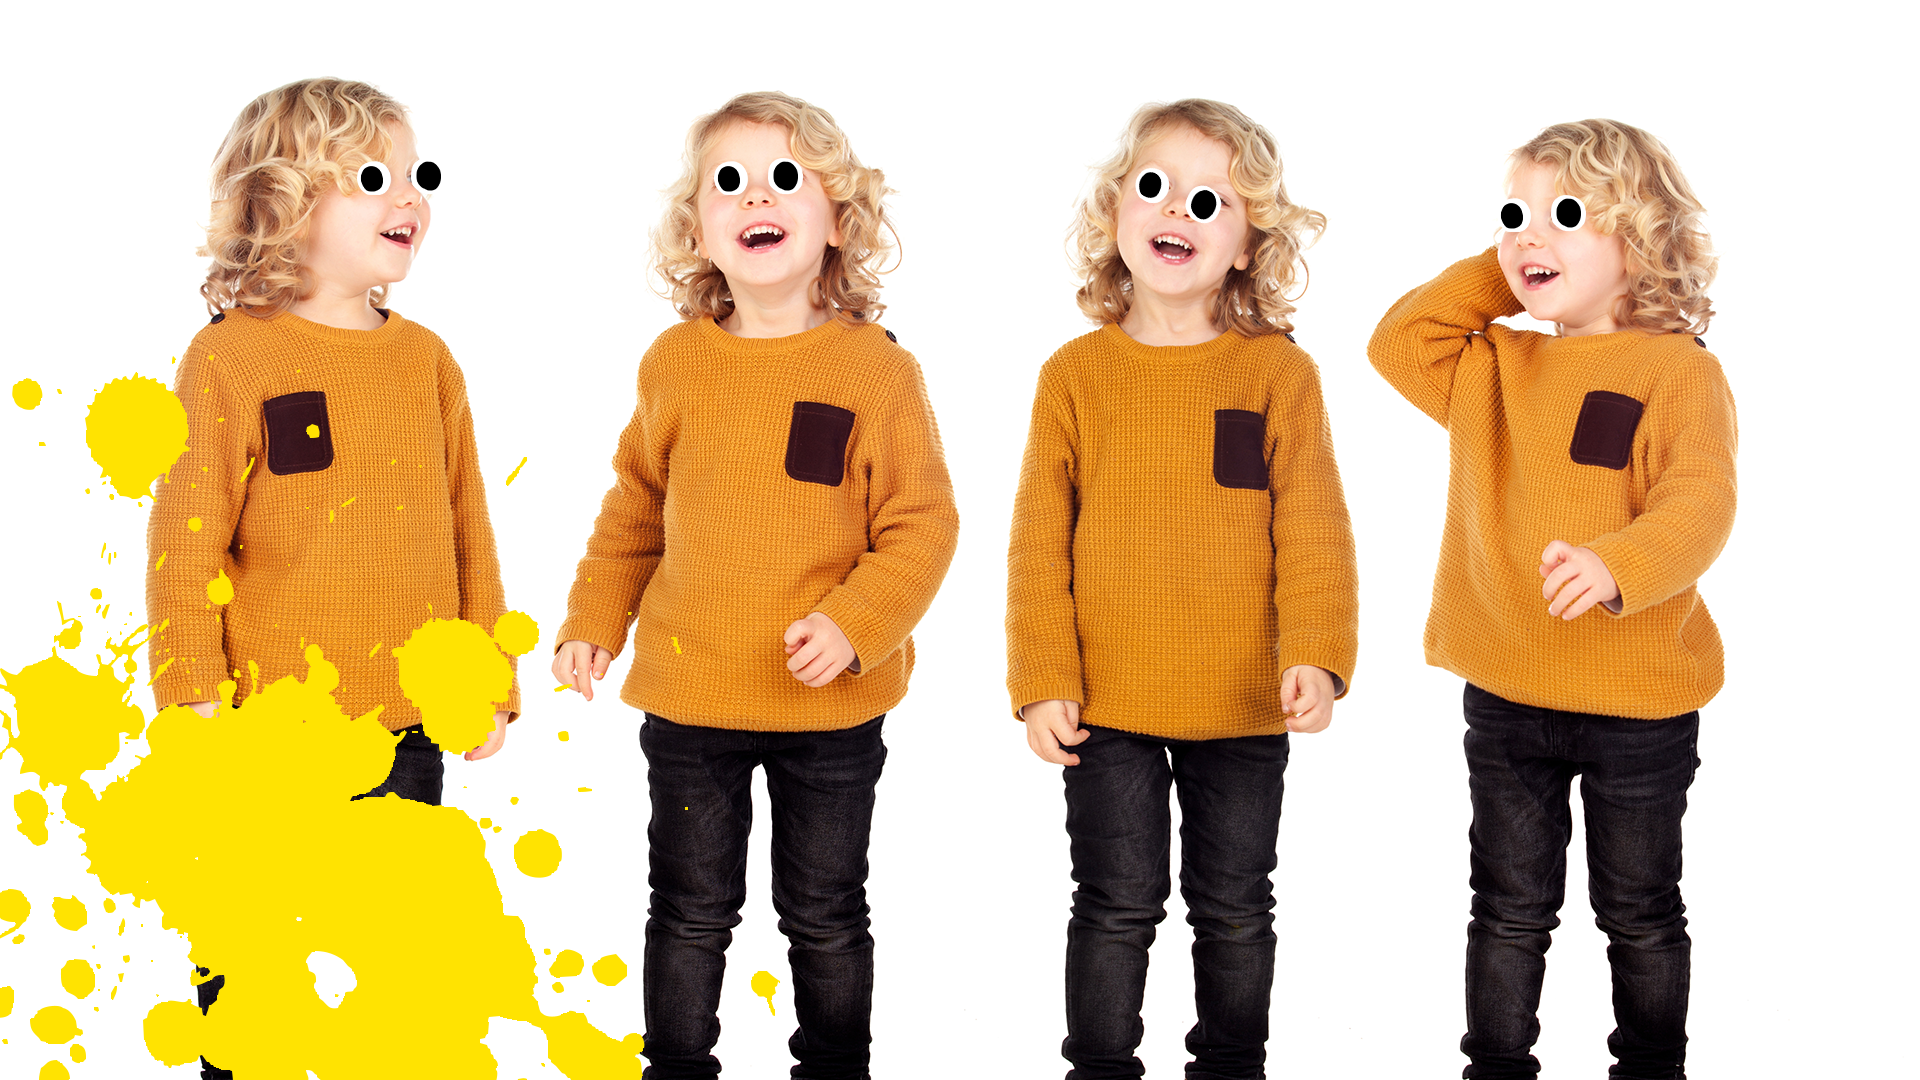 Four identical children on a white background